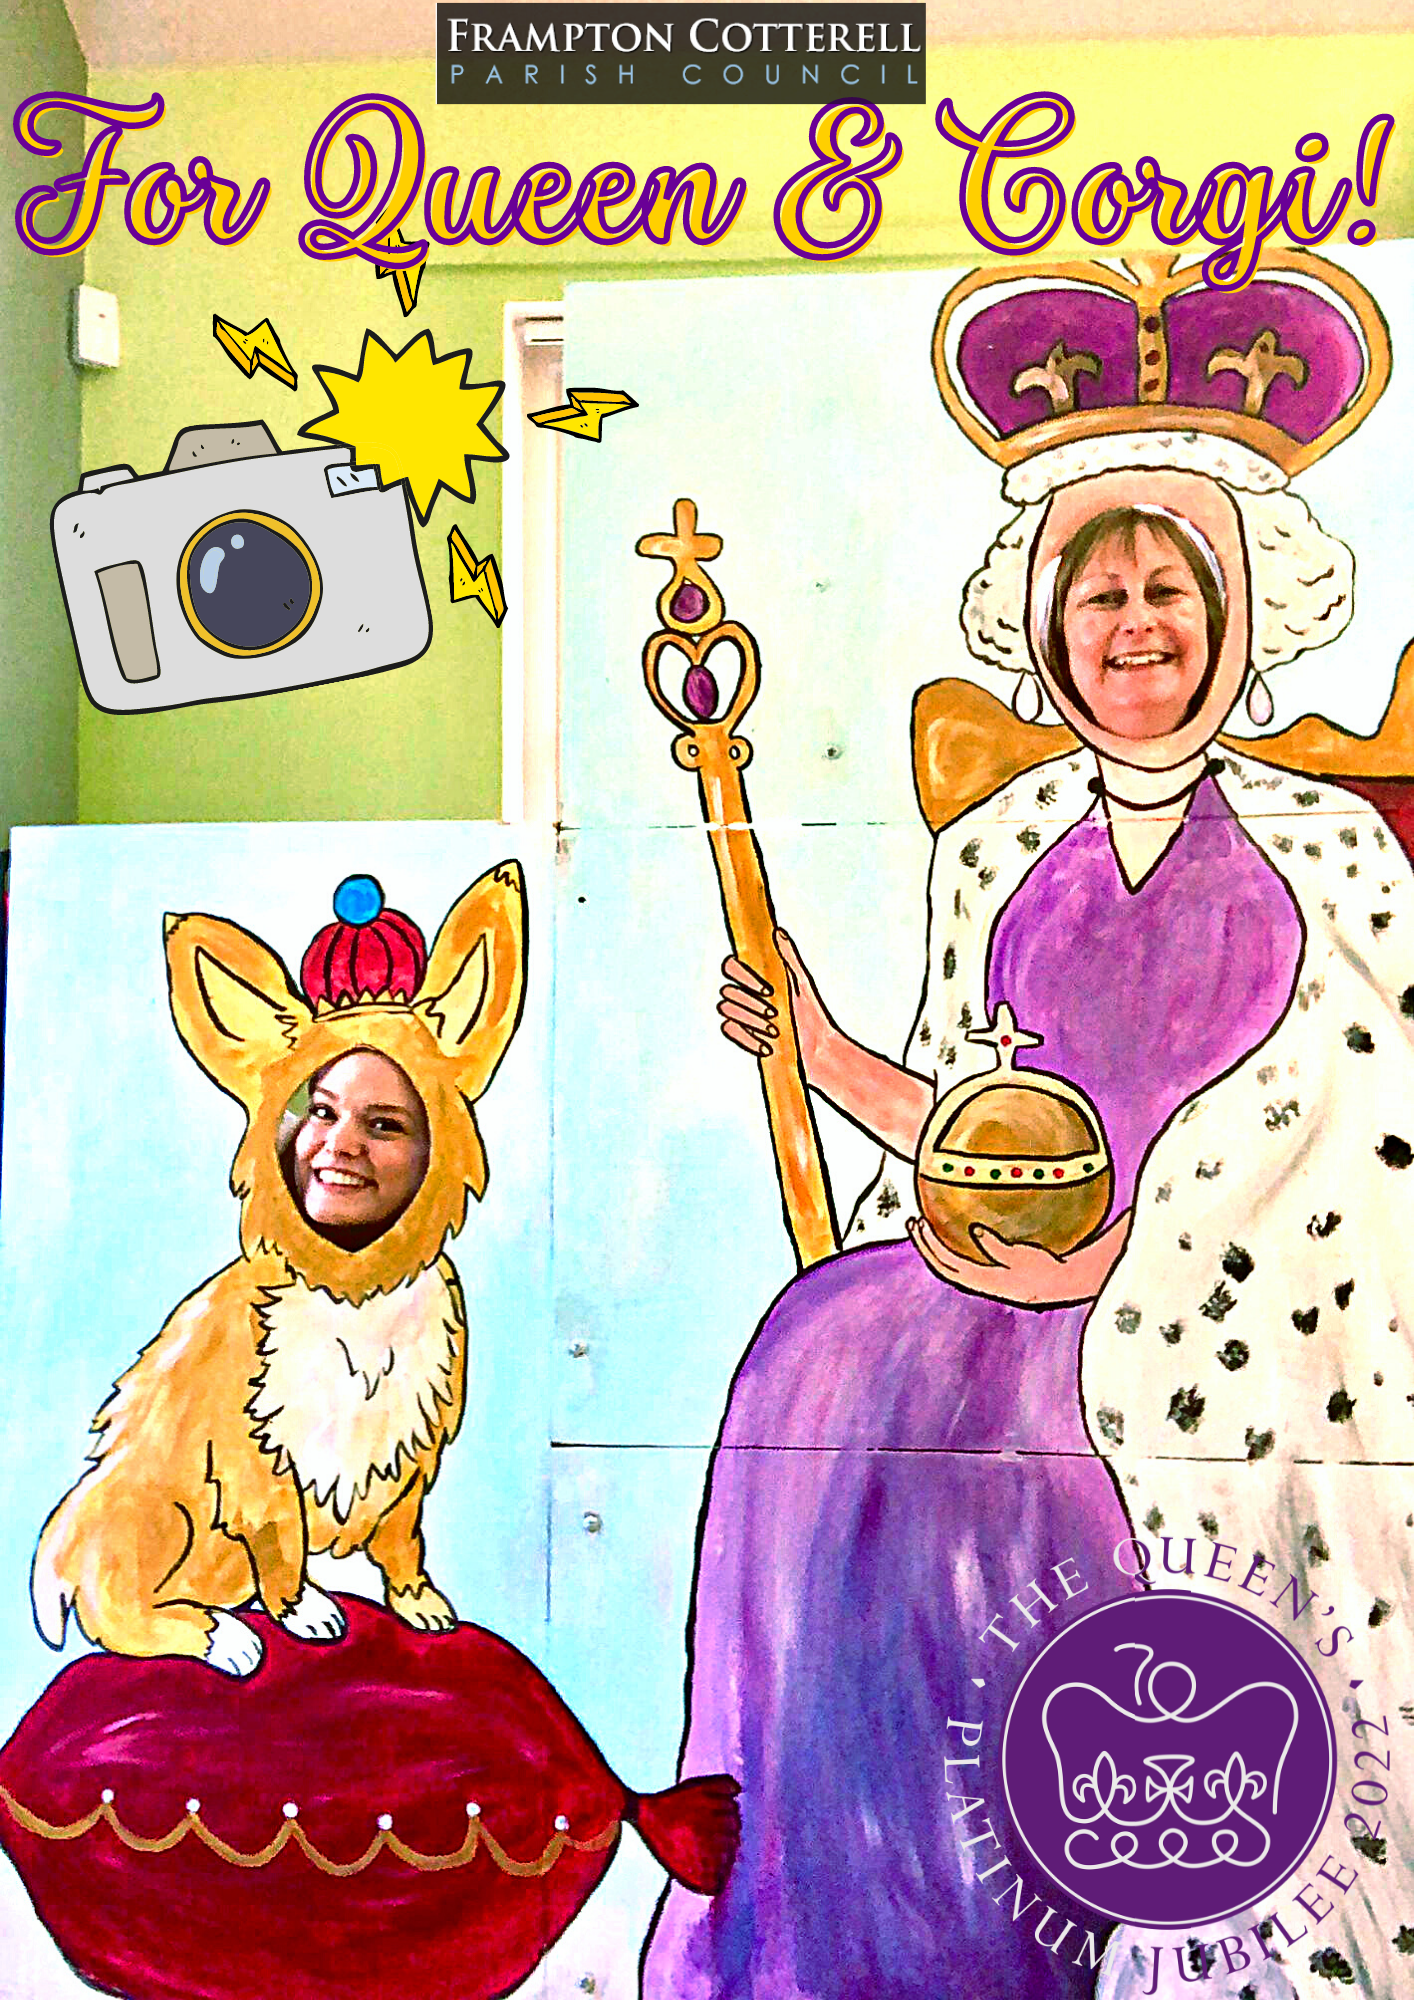 Photograph of a Queen & Corgi photo stand in board. It is a large wooden board, about 6 feet tall, painted with stylised images of the Queen on her throne and a corgi wearing a crown. Oval holes have been cut out where the Queen's face and the Corgi's face would be, and two smiling people are looking through the holes. A cartoon camera sticker has been added to the top left of the photo, and along the top are the words "For Queen & Corgi!" in gold and purple calligraphic font.